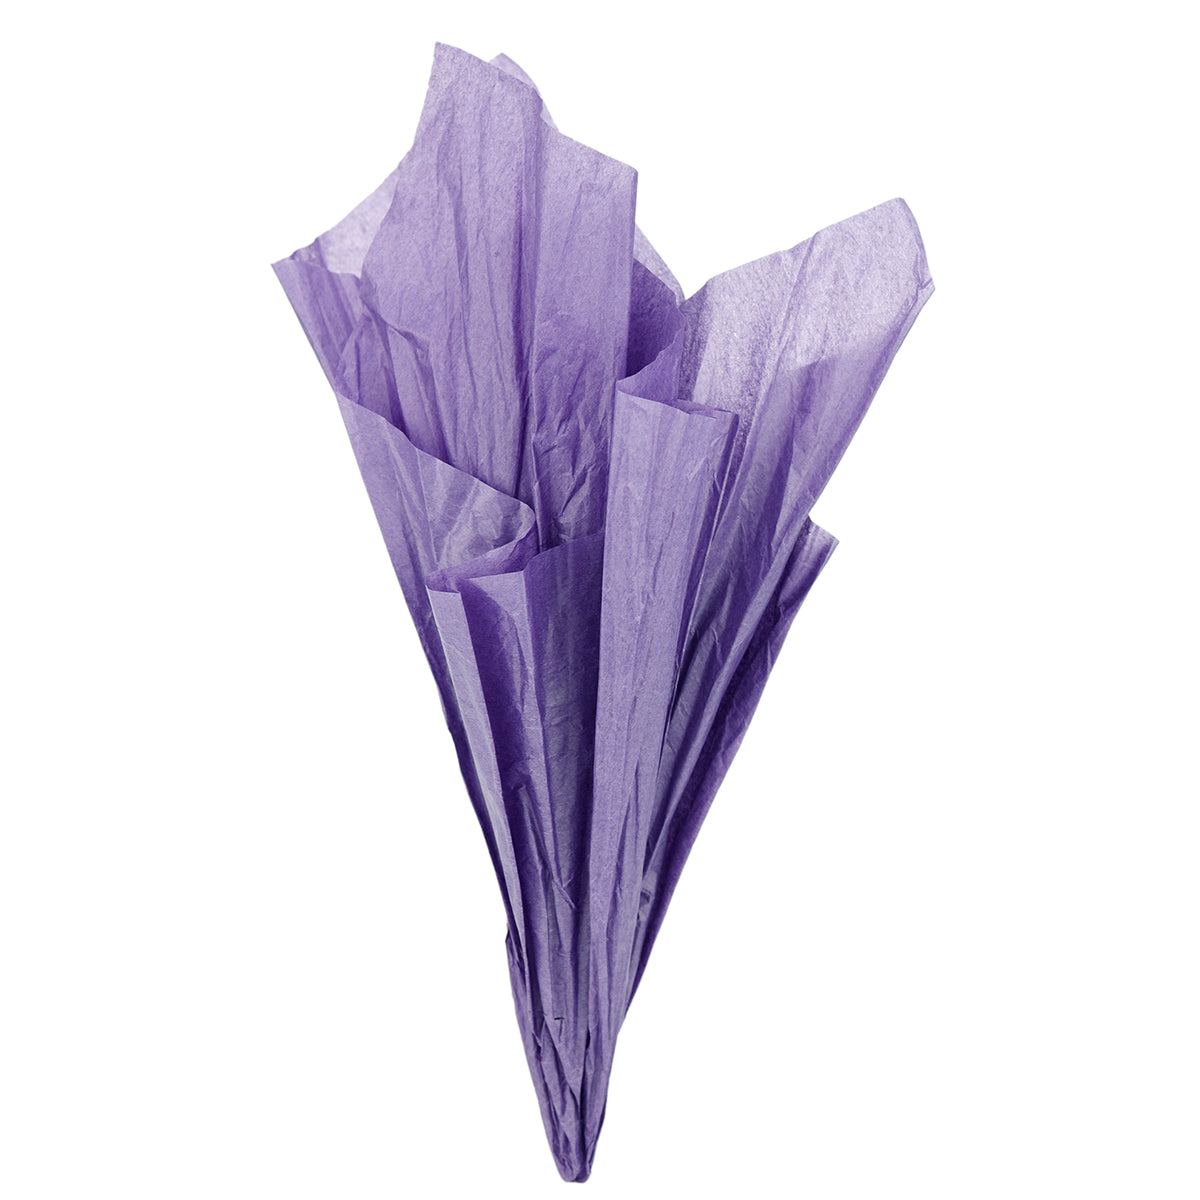 Displaying of a dark purple tissue paper in ice cream cone shape